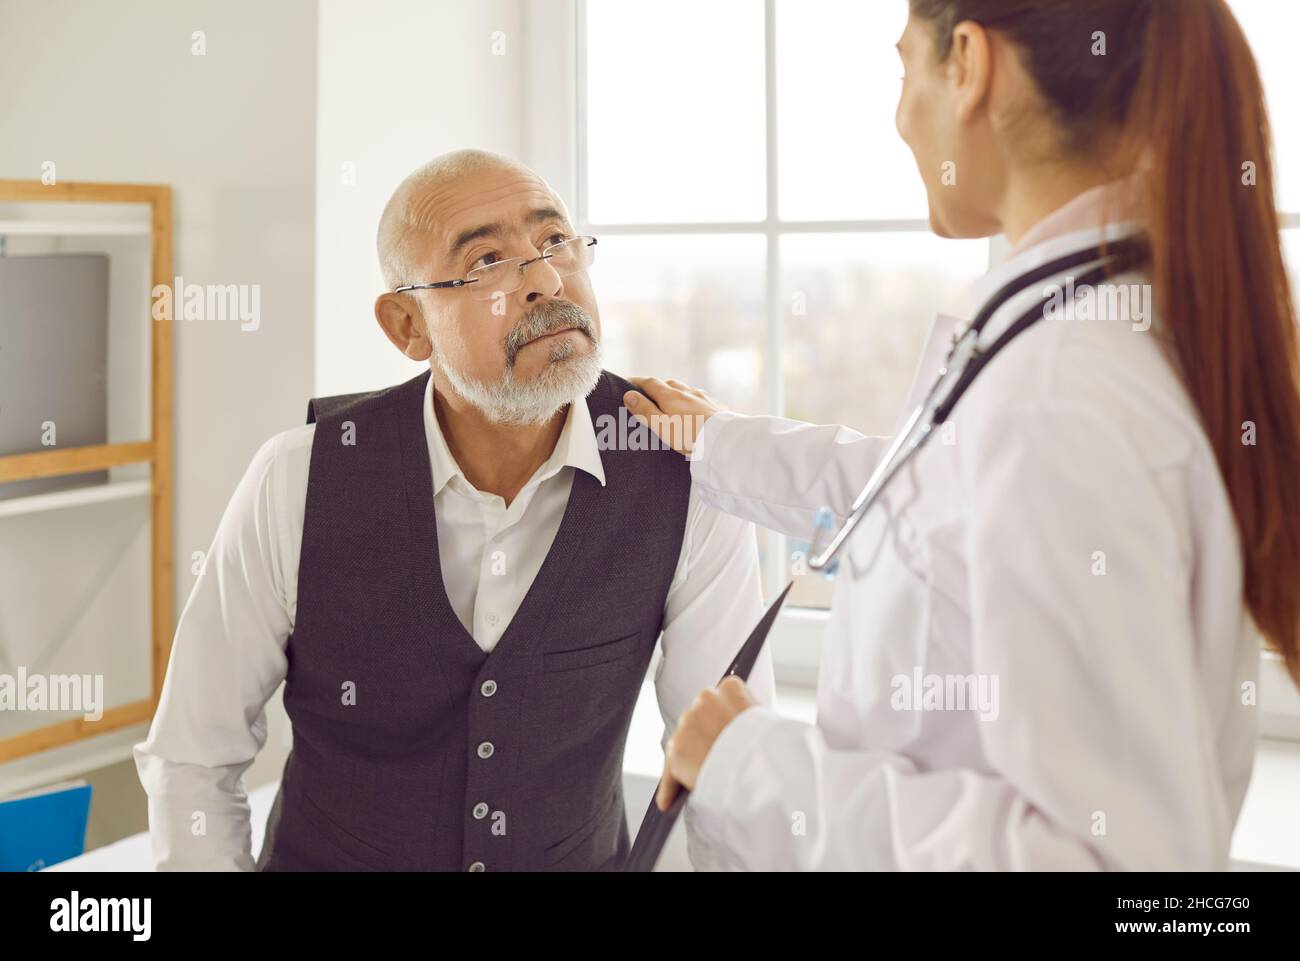 Doctor puts her hand on her senior patient's shoulder to reassure and support him Stock Photo